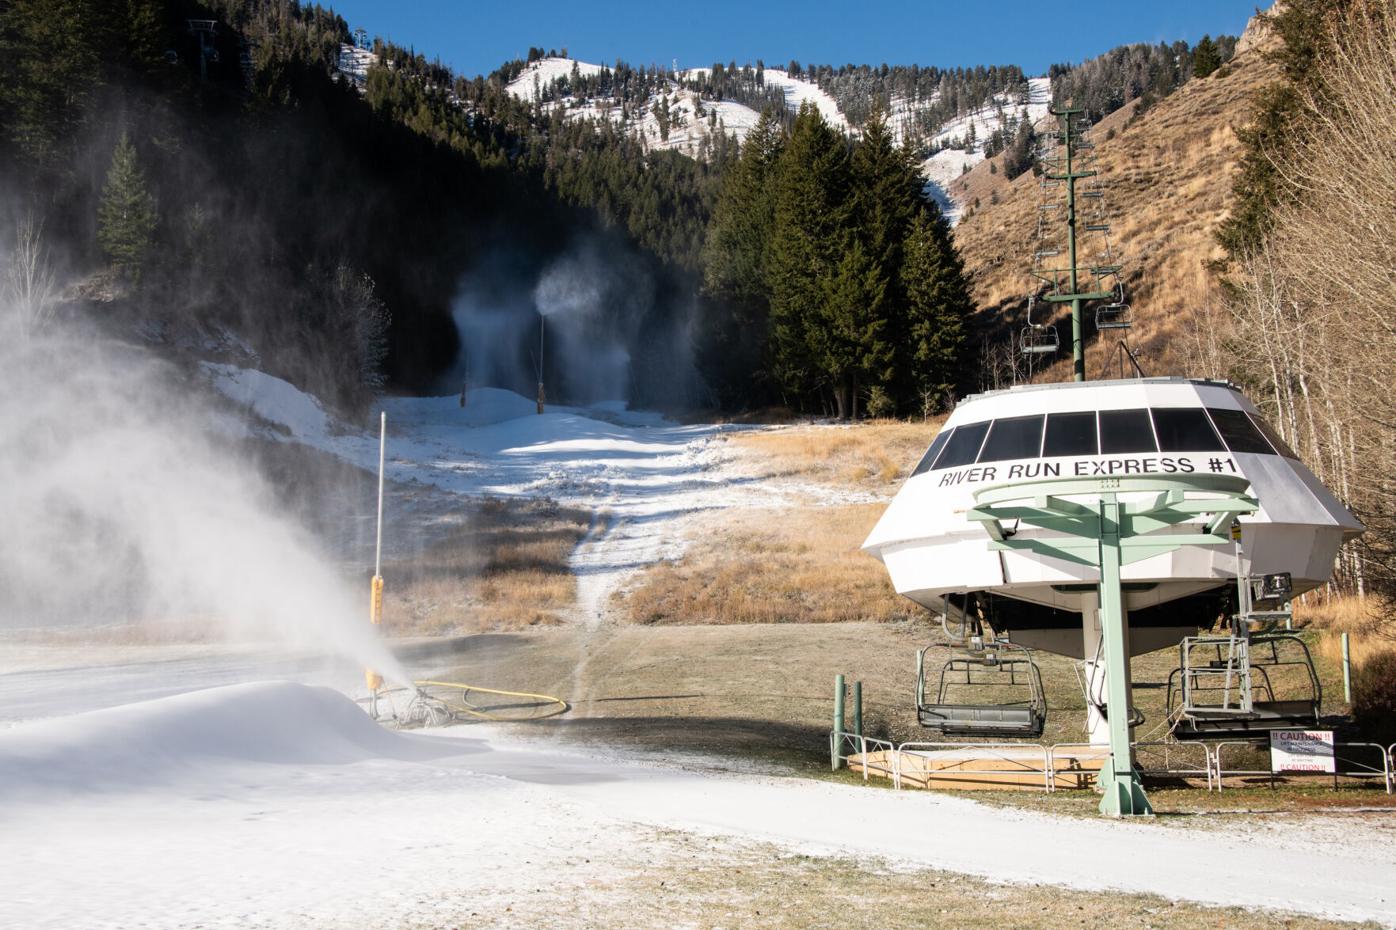 New Study On Snowmaking Sparks Environmental Concerns - Snowboarder